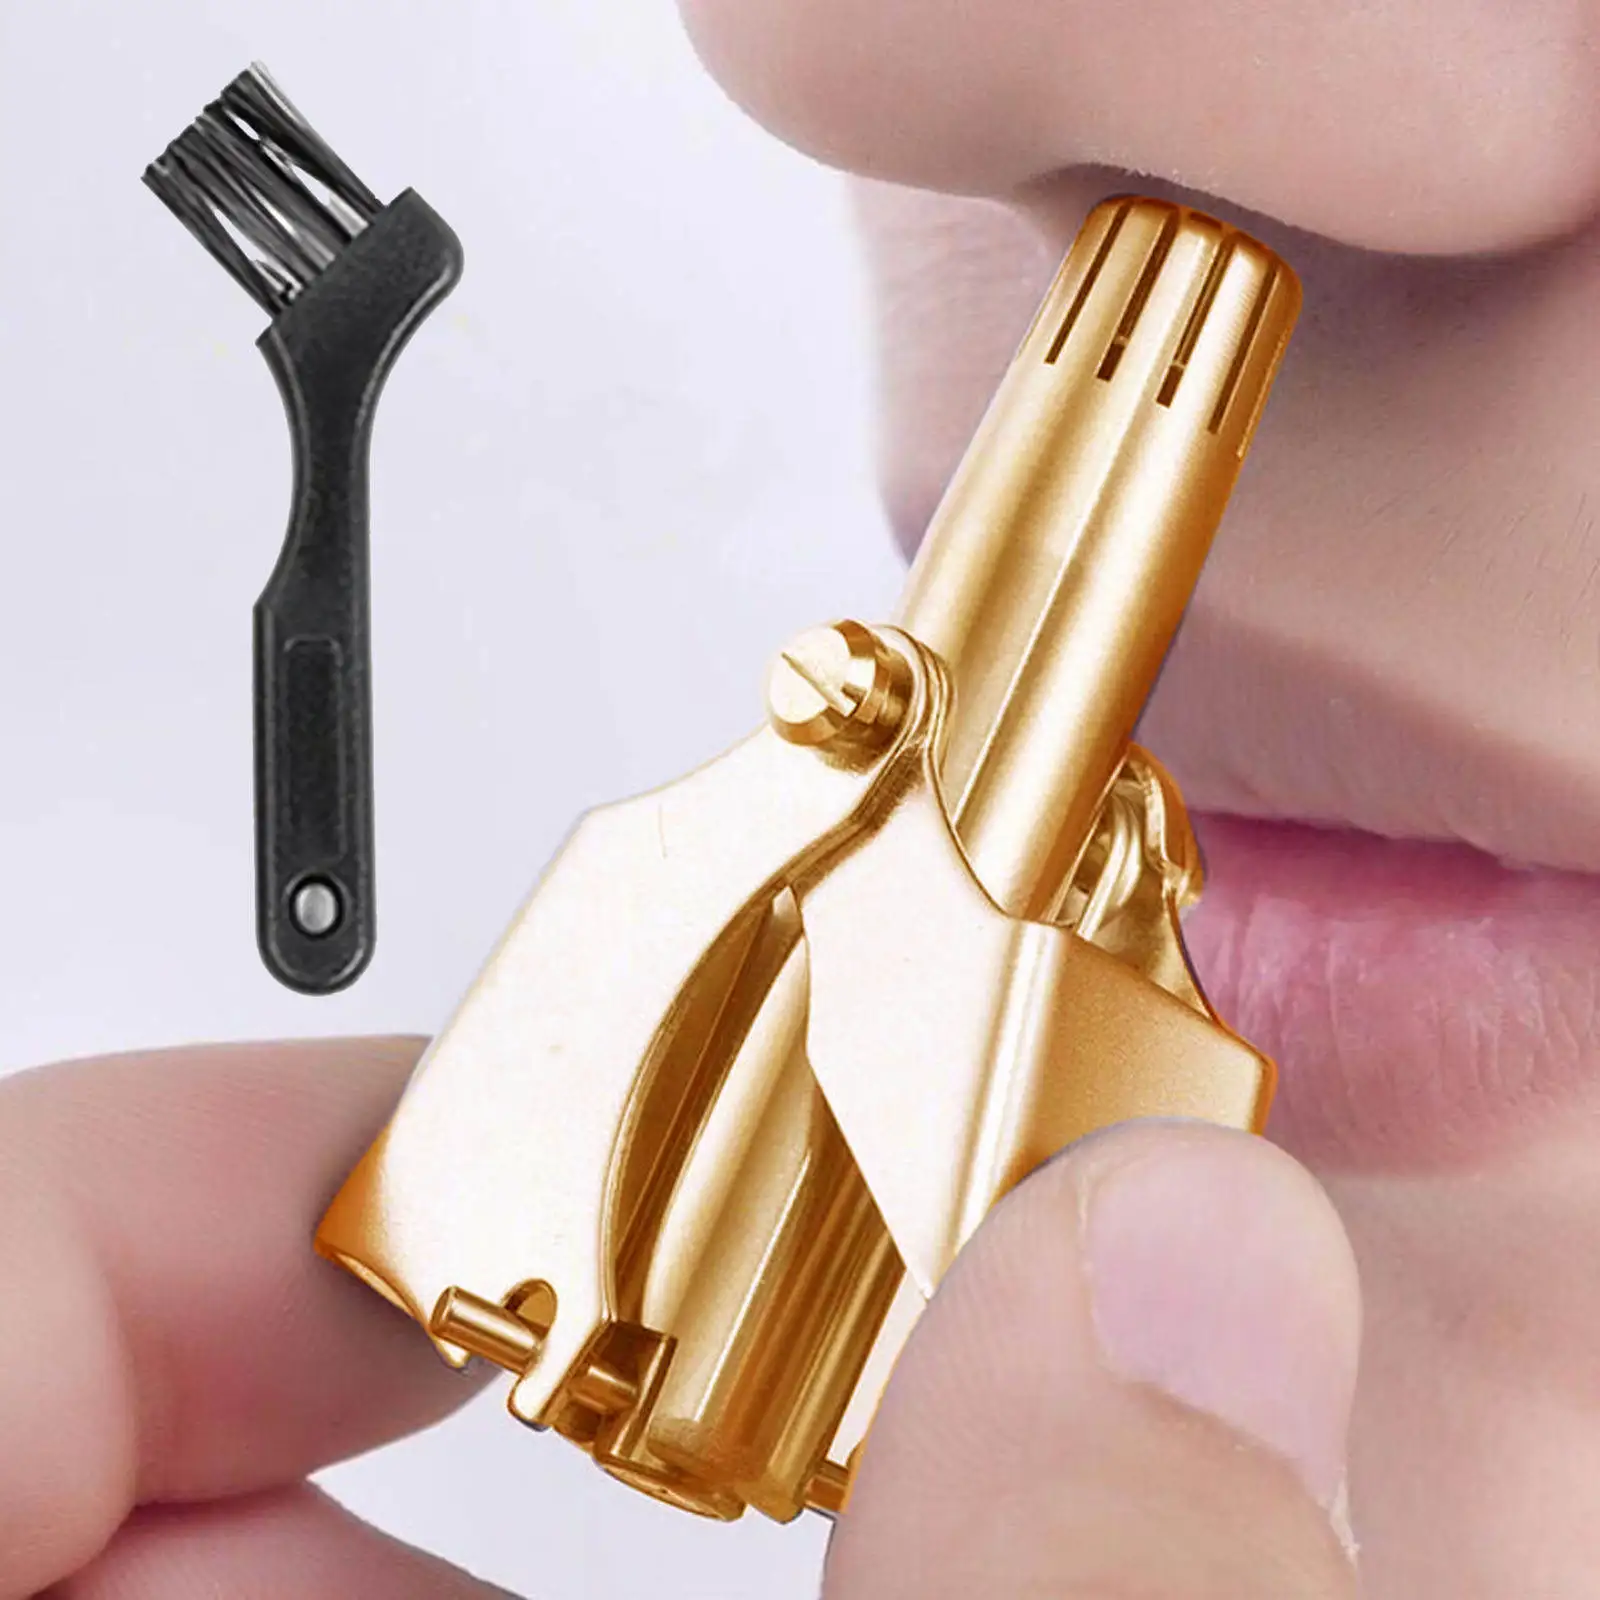 Ear and Nose Hair Trimmer Washable Removable No Batteries Clipper Removal Cleaner for Men Women